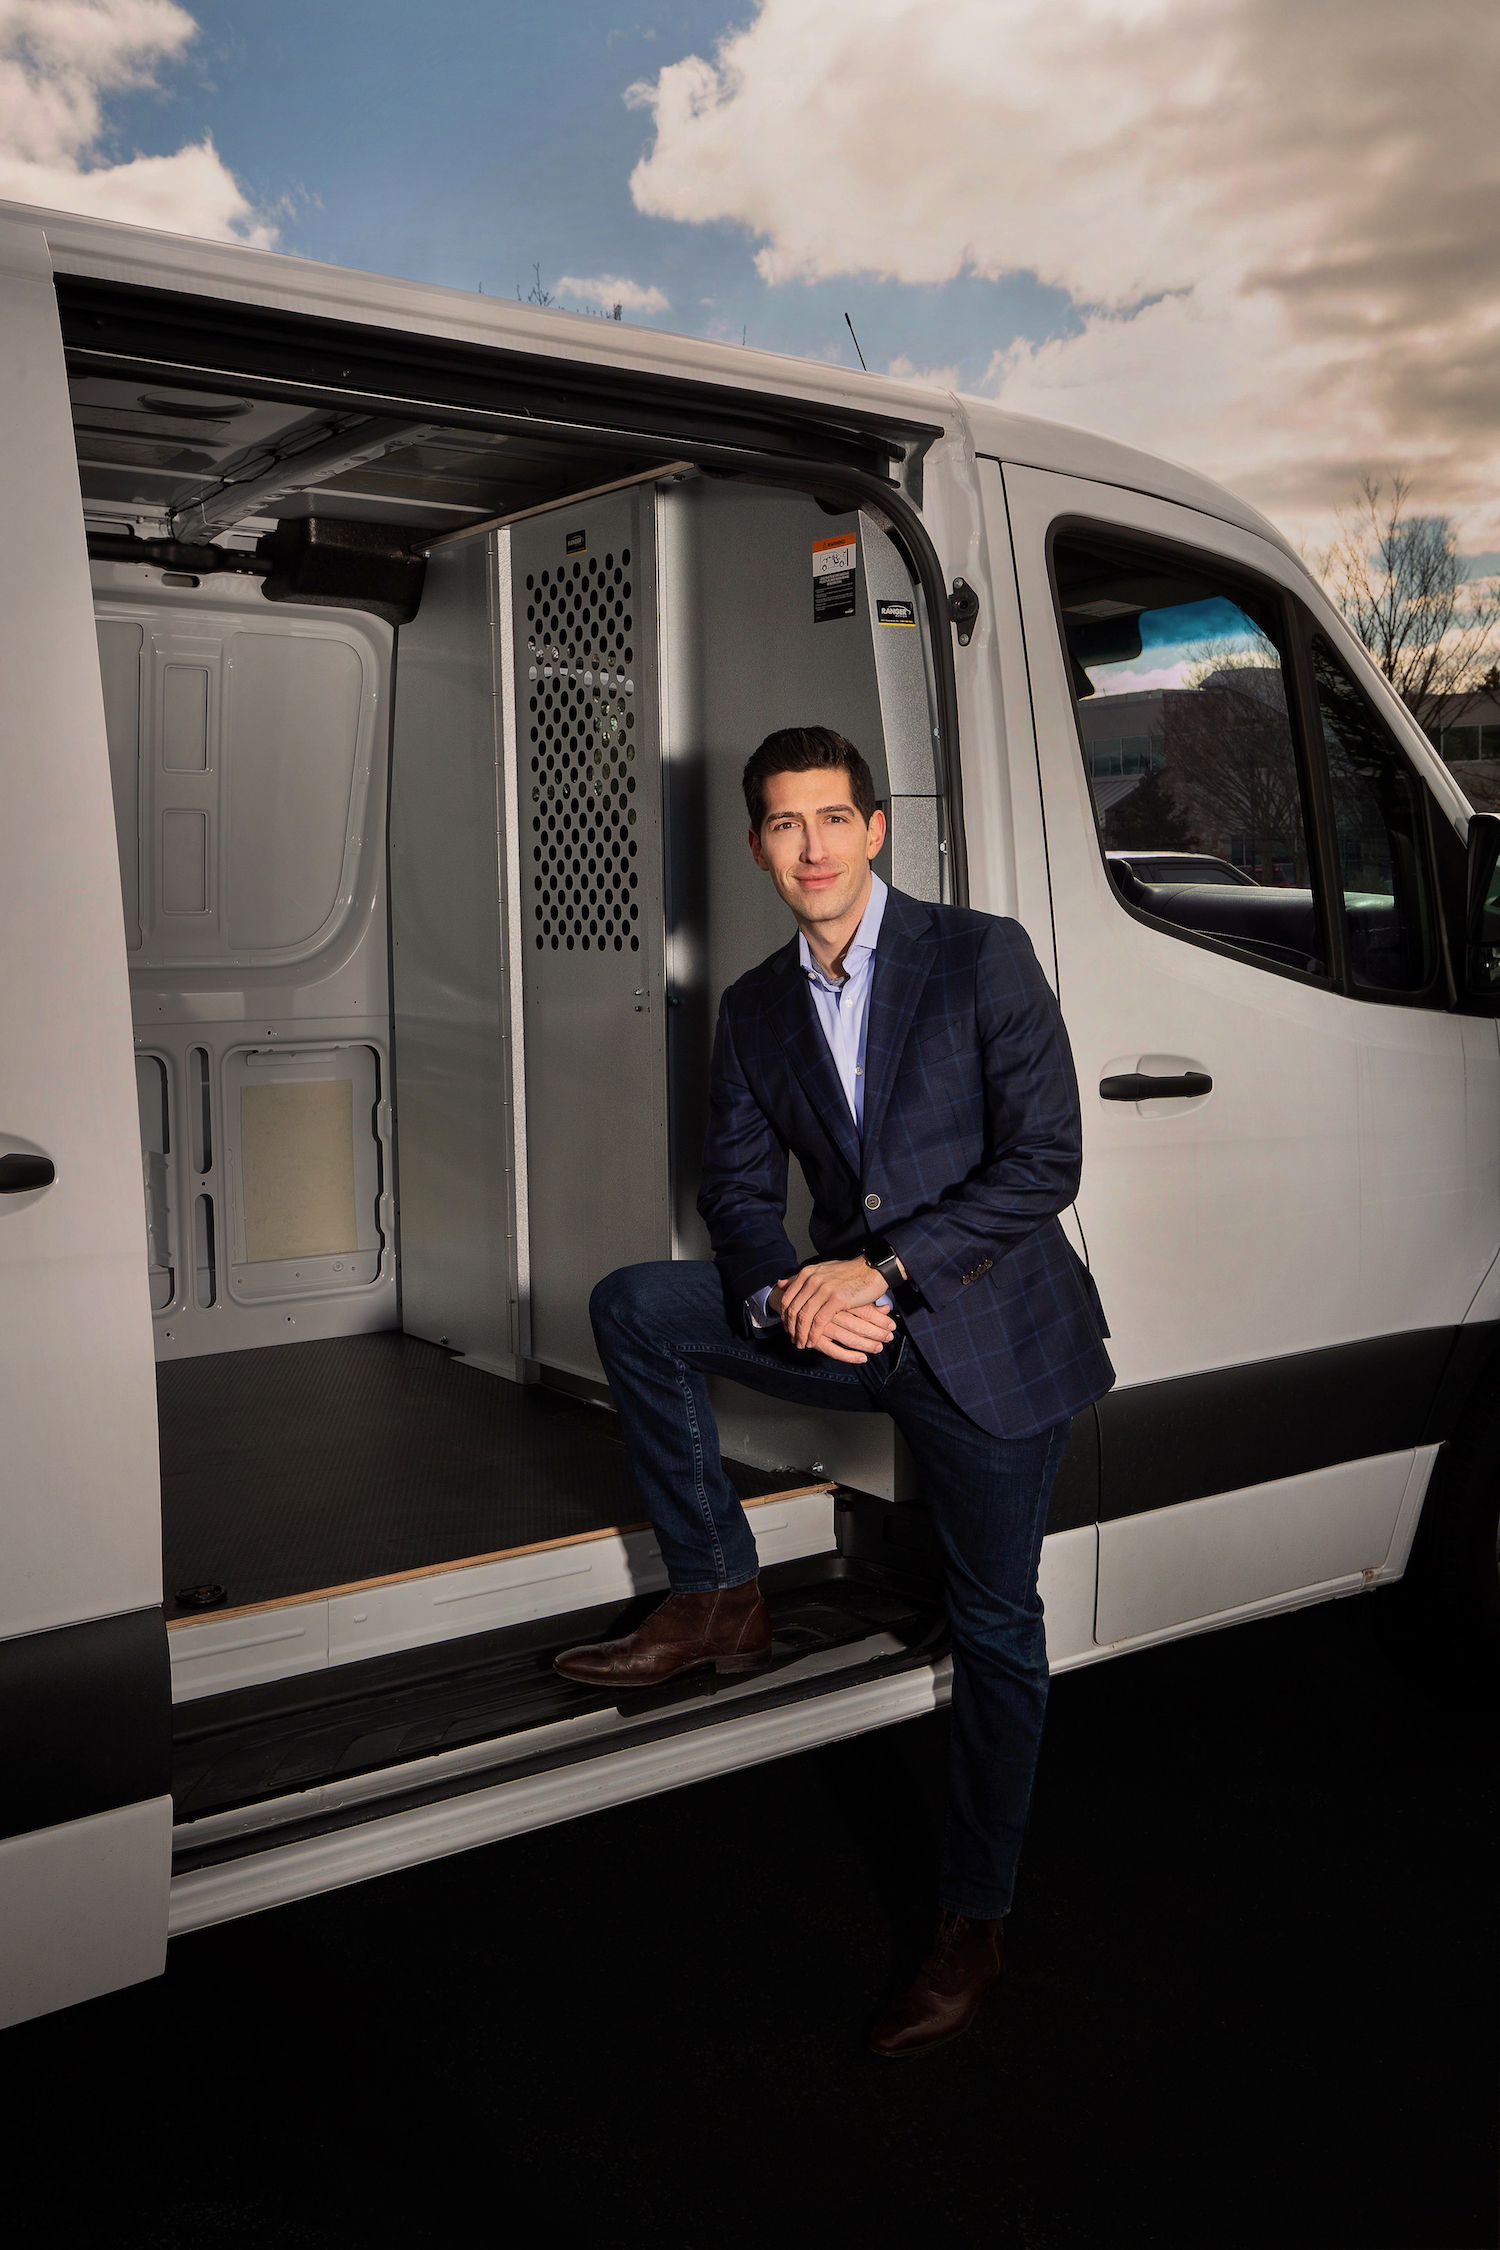 Ari Raptis is the founder and CEO of Talaria Transportation, a Philadelphia-based company specializing in secure logistics for the legal cannabis industry.